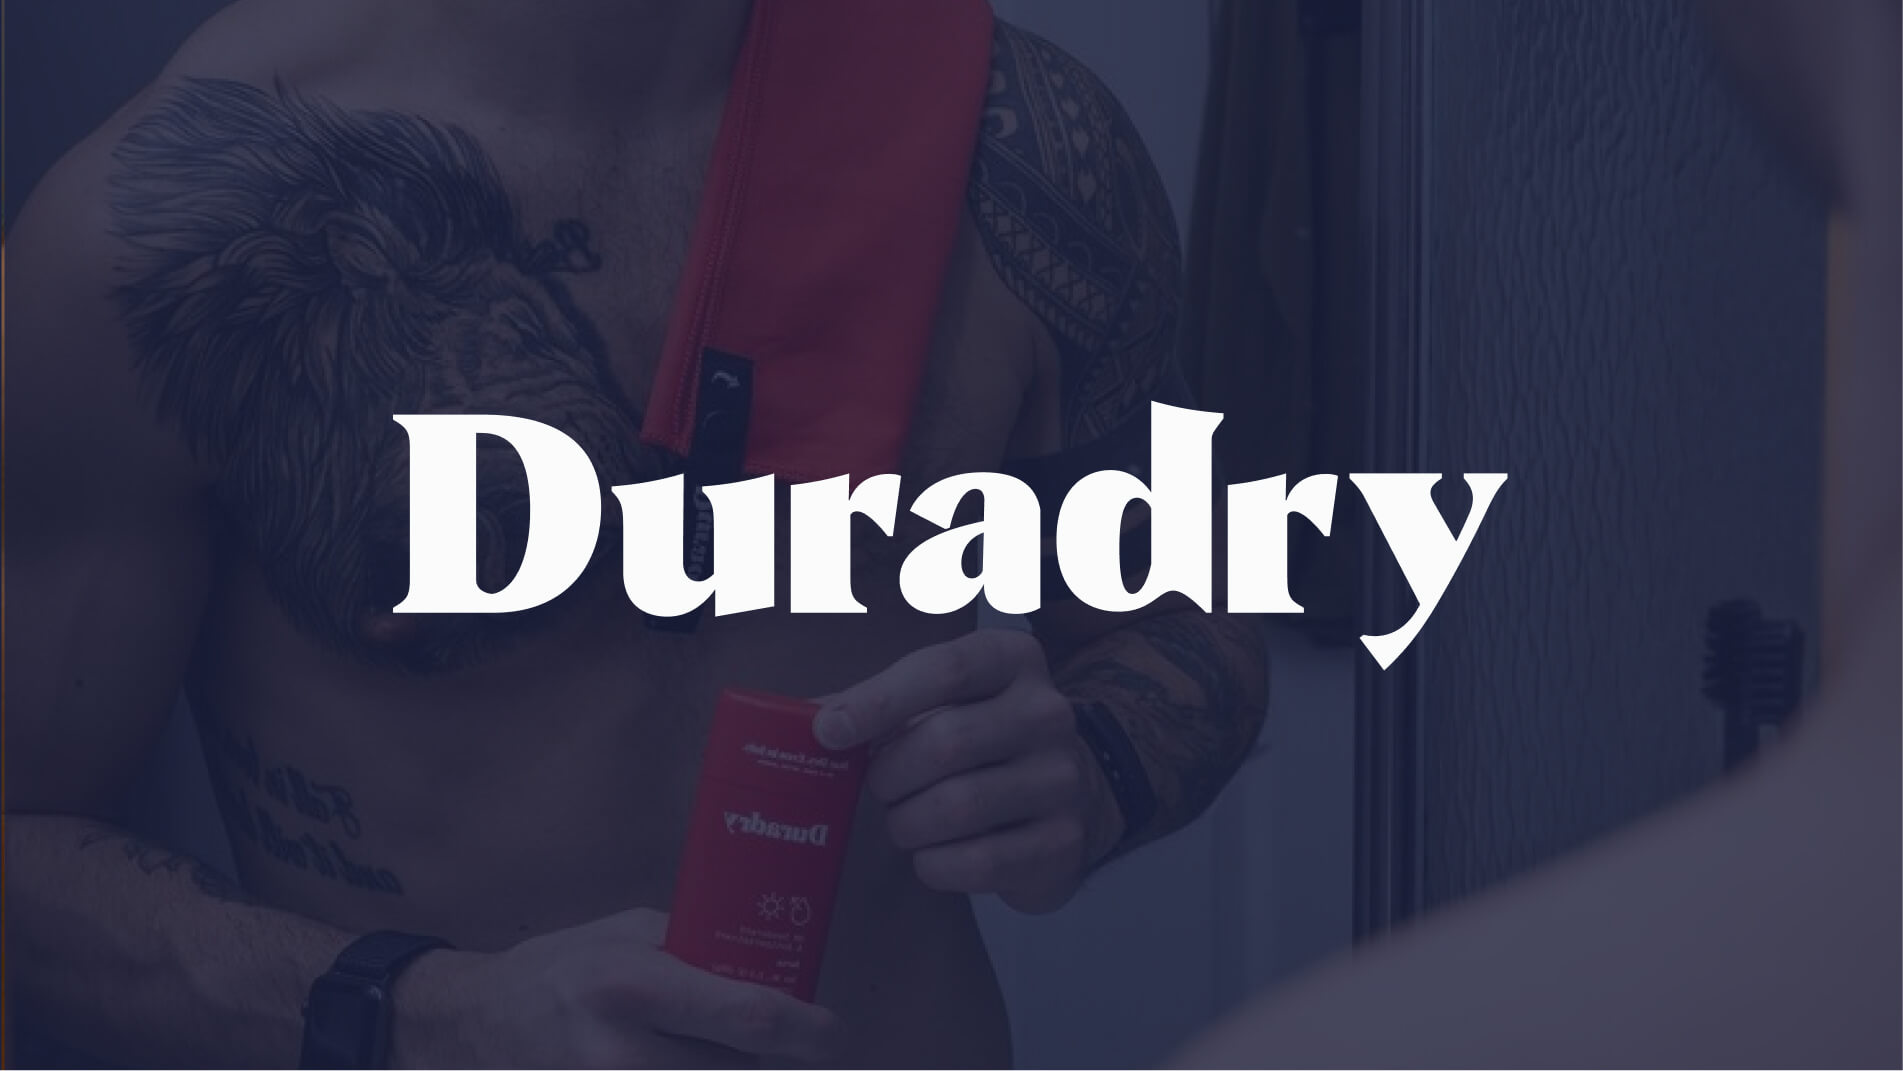 Duradry logo over a customer using Duradry products.